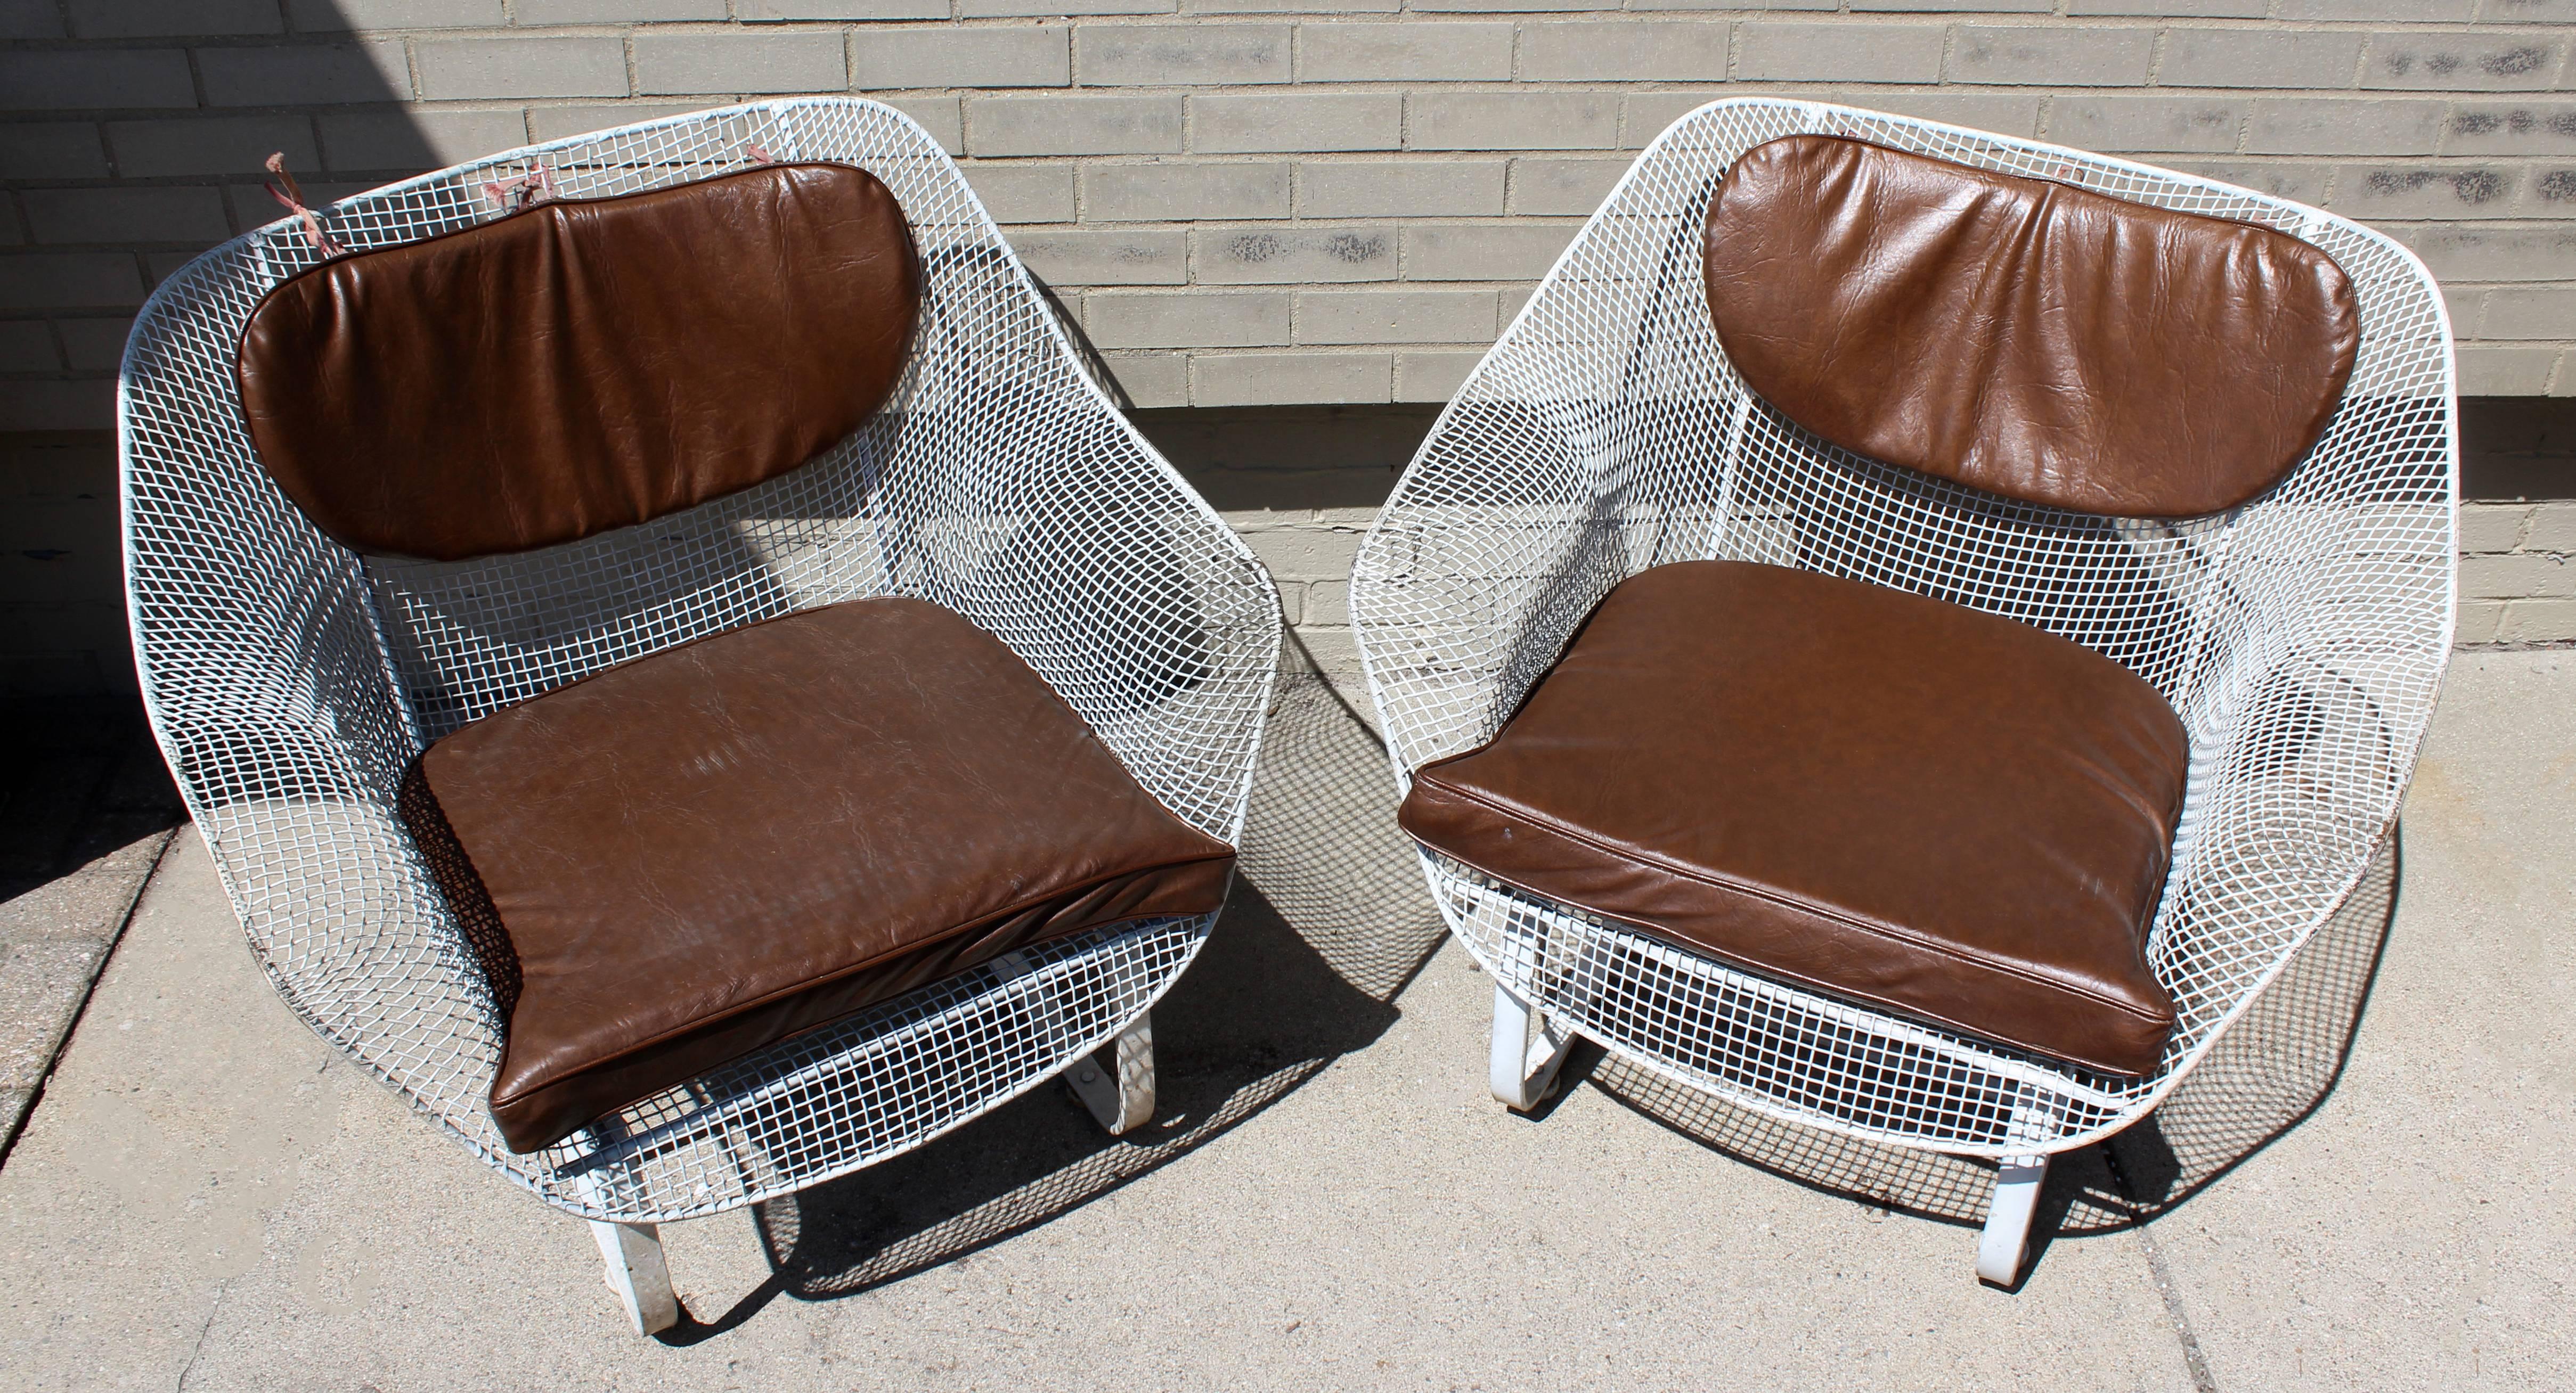 For your consideration is a fabulous pair of wrought iron, patio rocking chairs, with brown vinyl cushions by Woodard, circa the 1950s. In great condition. The dimensions are 33.25